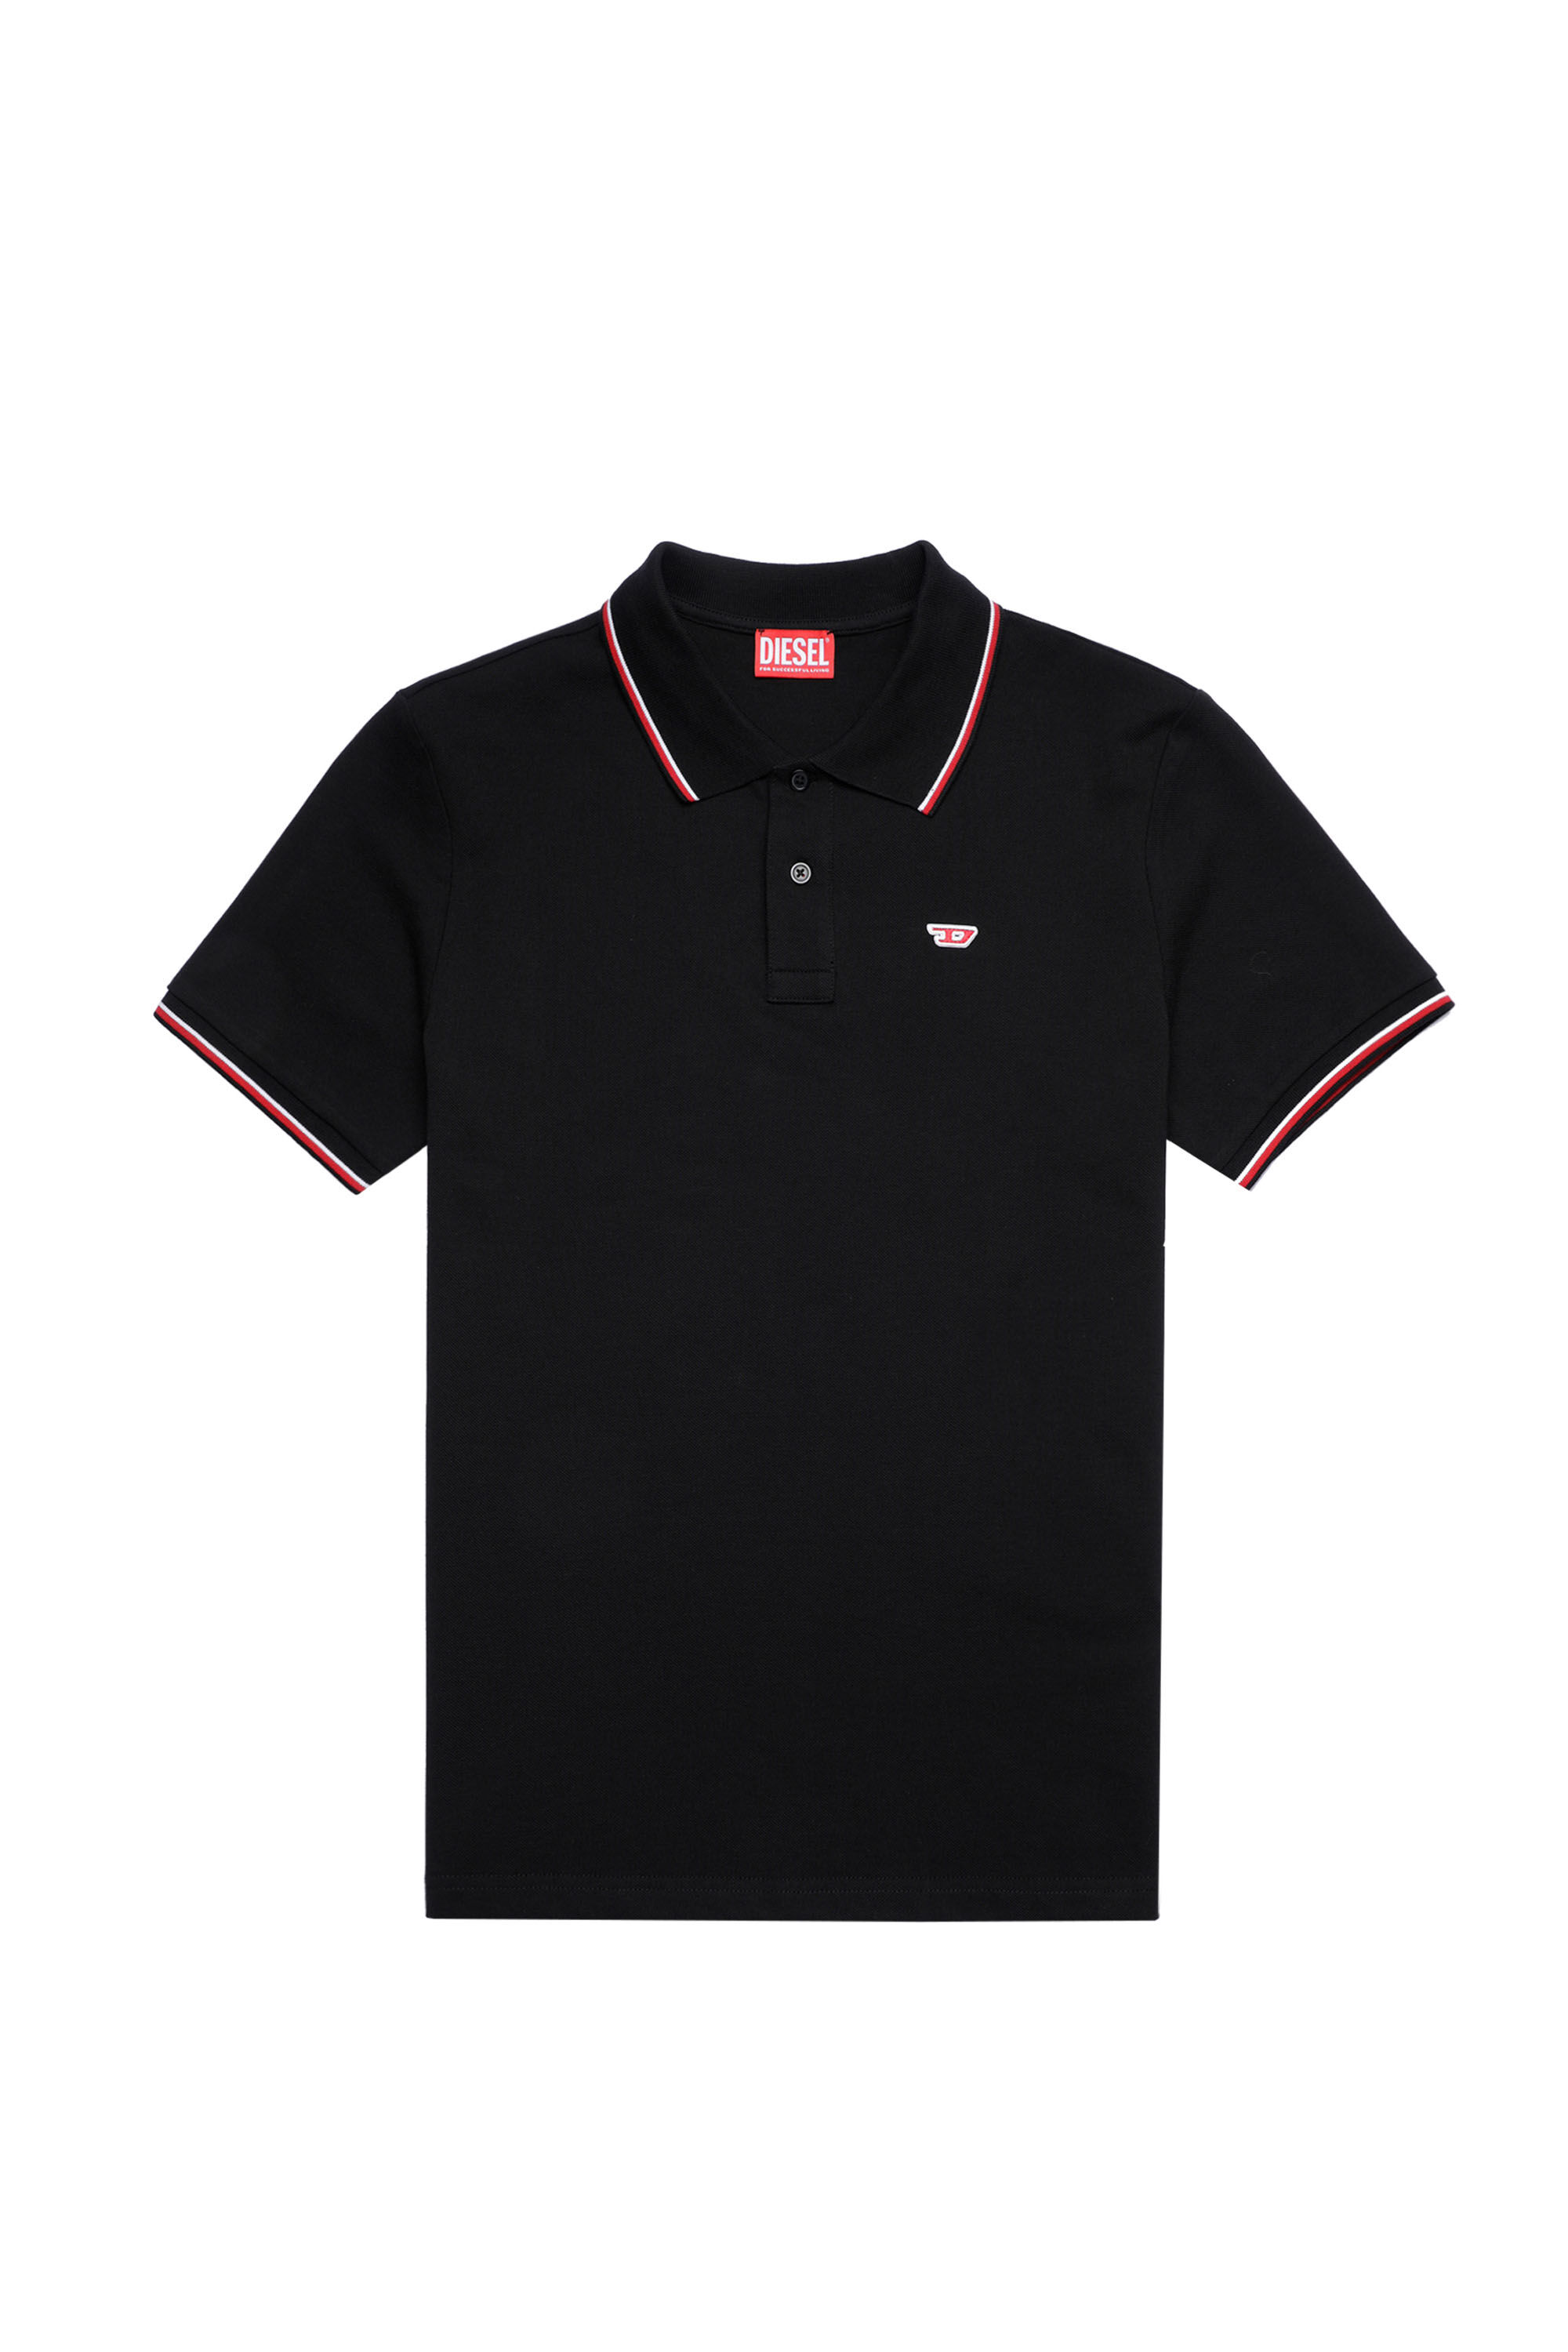 Diesel - T-SMITH-D, Man Polo shirt with striped trims in Black - Image 2